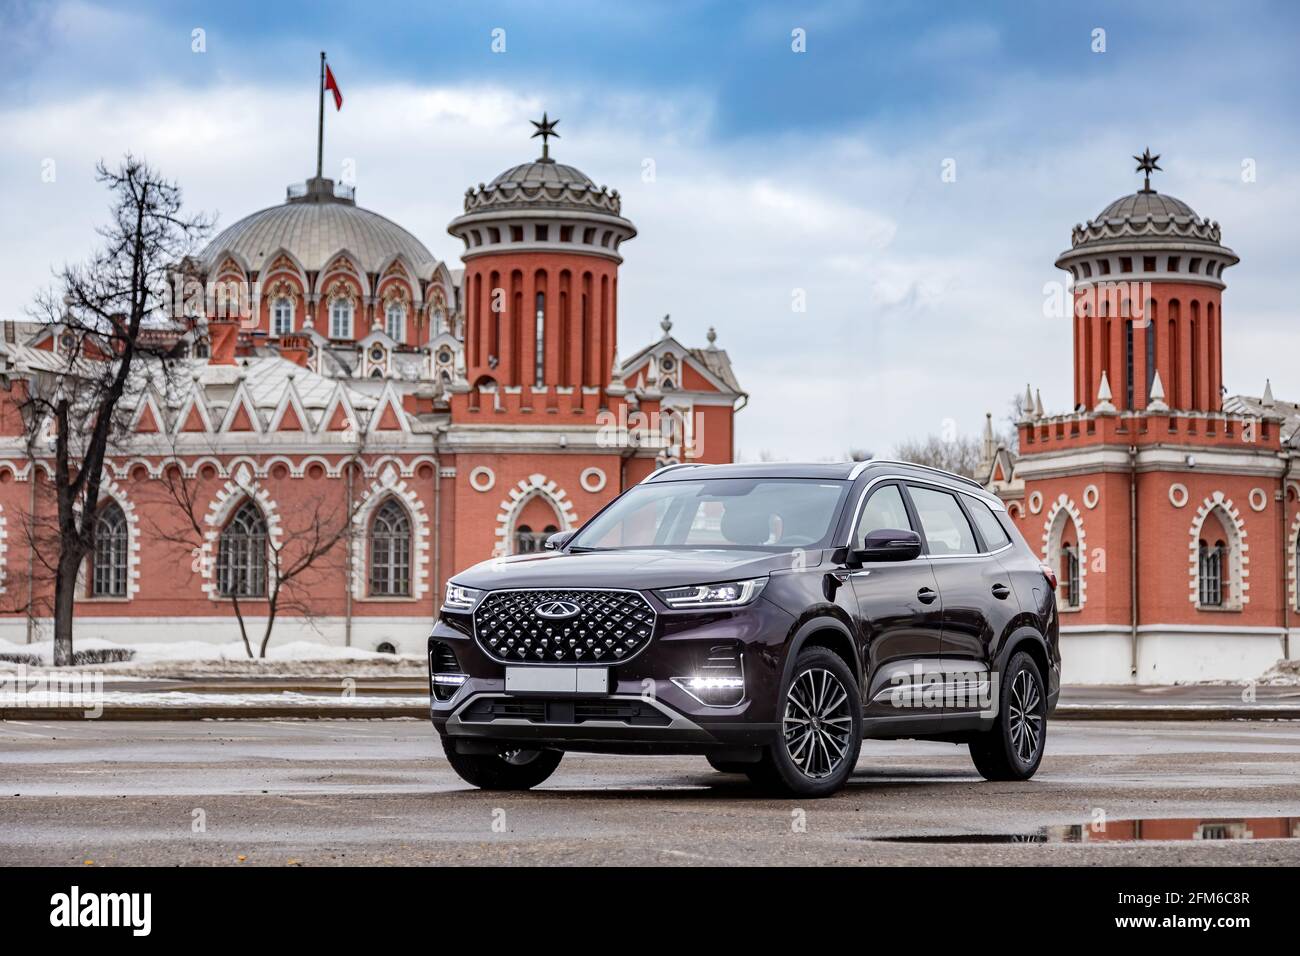 https://c8.alamy.com/comp/2FM6C8R/moscow-russia-march-19-2021-chery-tiggo-8-pro-plus-the-car-is-parked-on-the-street-of-a-big-city-megapolis-the-suv-is-purple-large-car-from-china-front-and-three-quarter-views-2FM6C8R.jpg